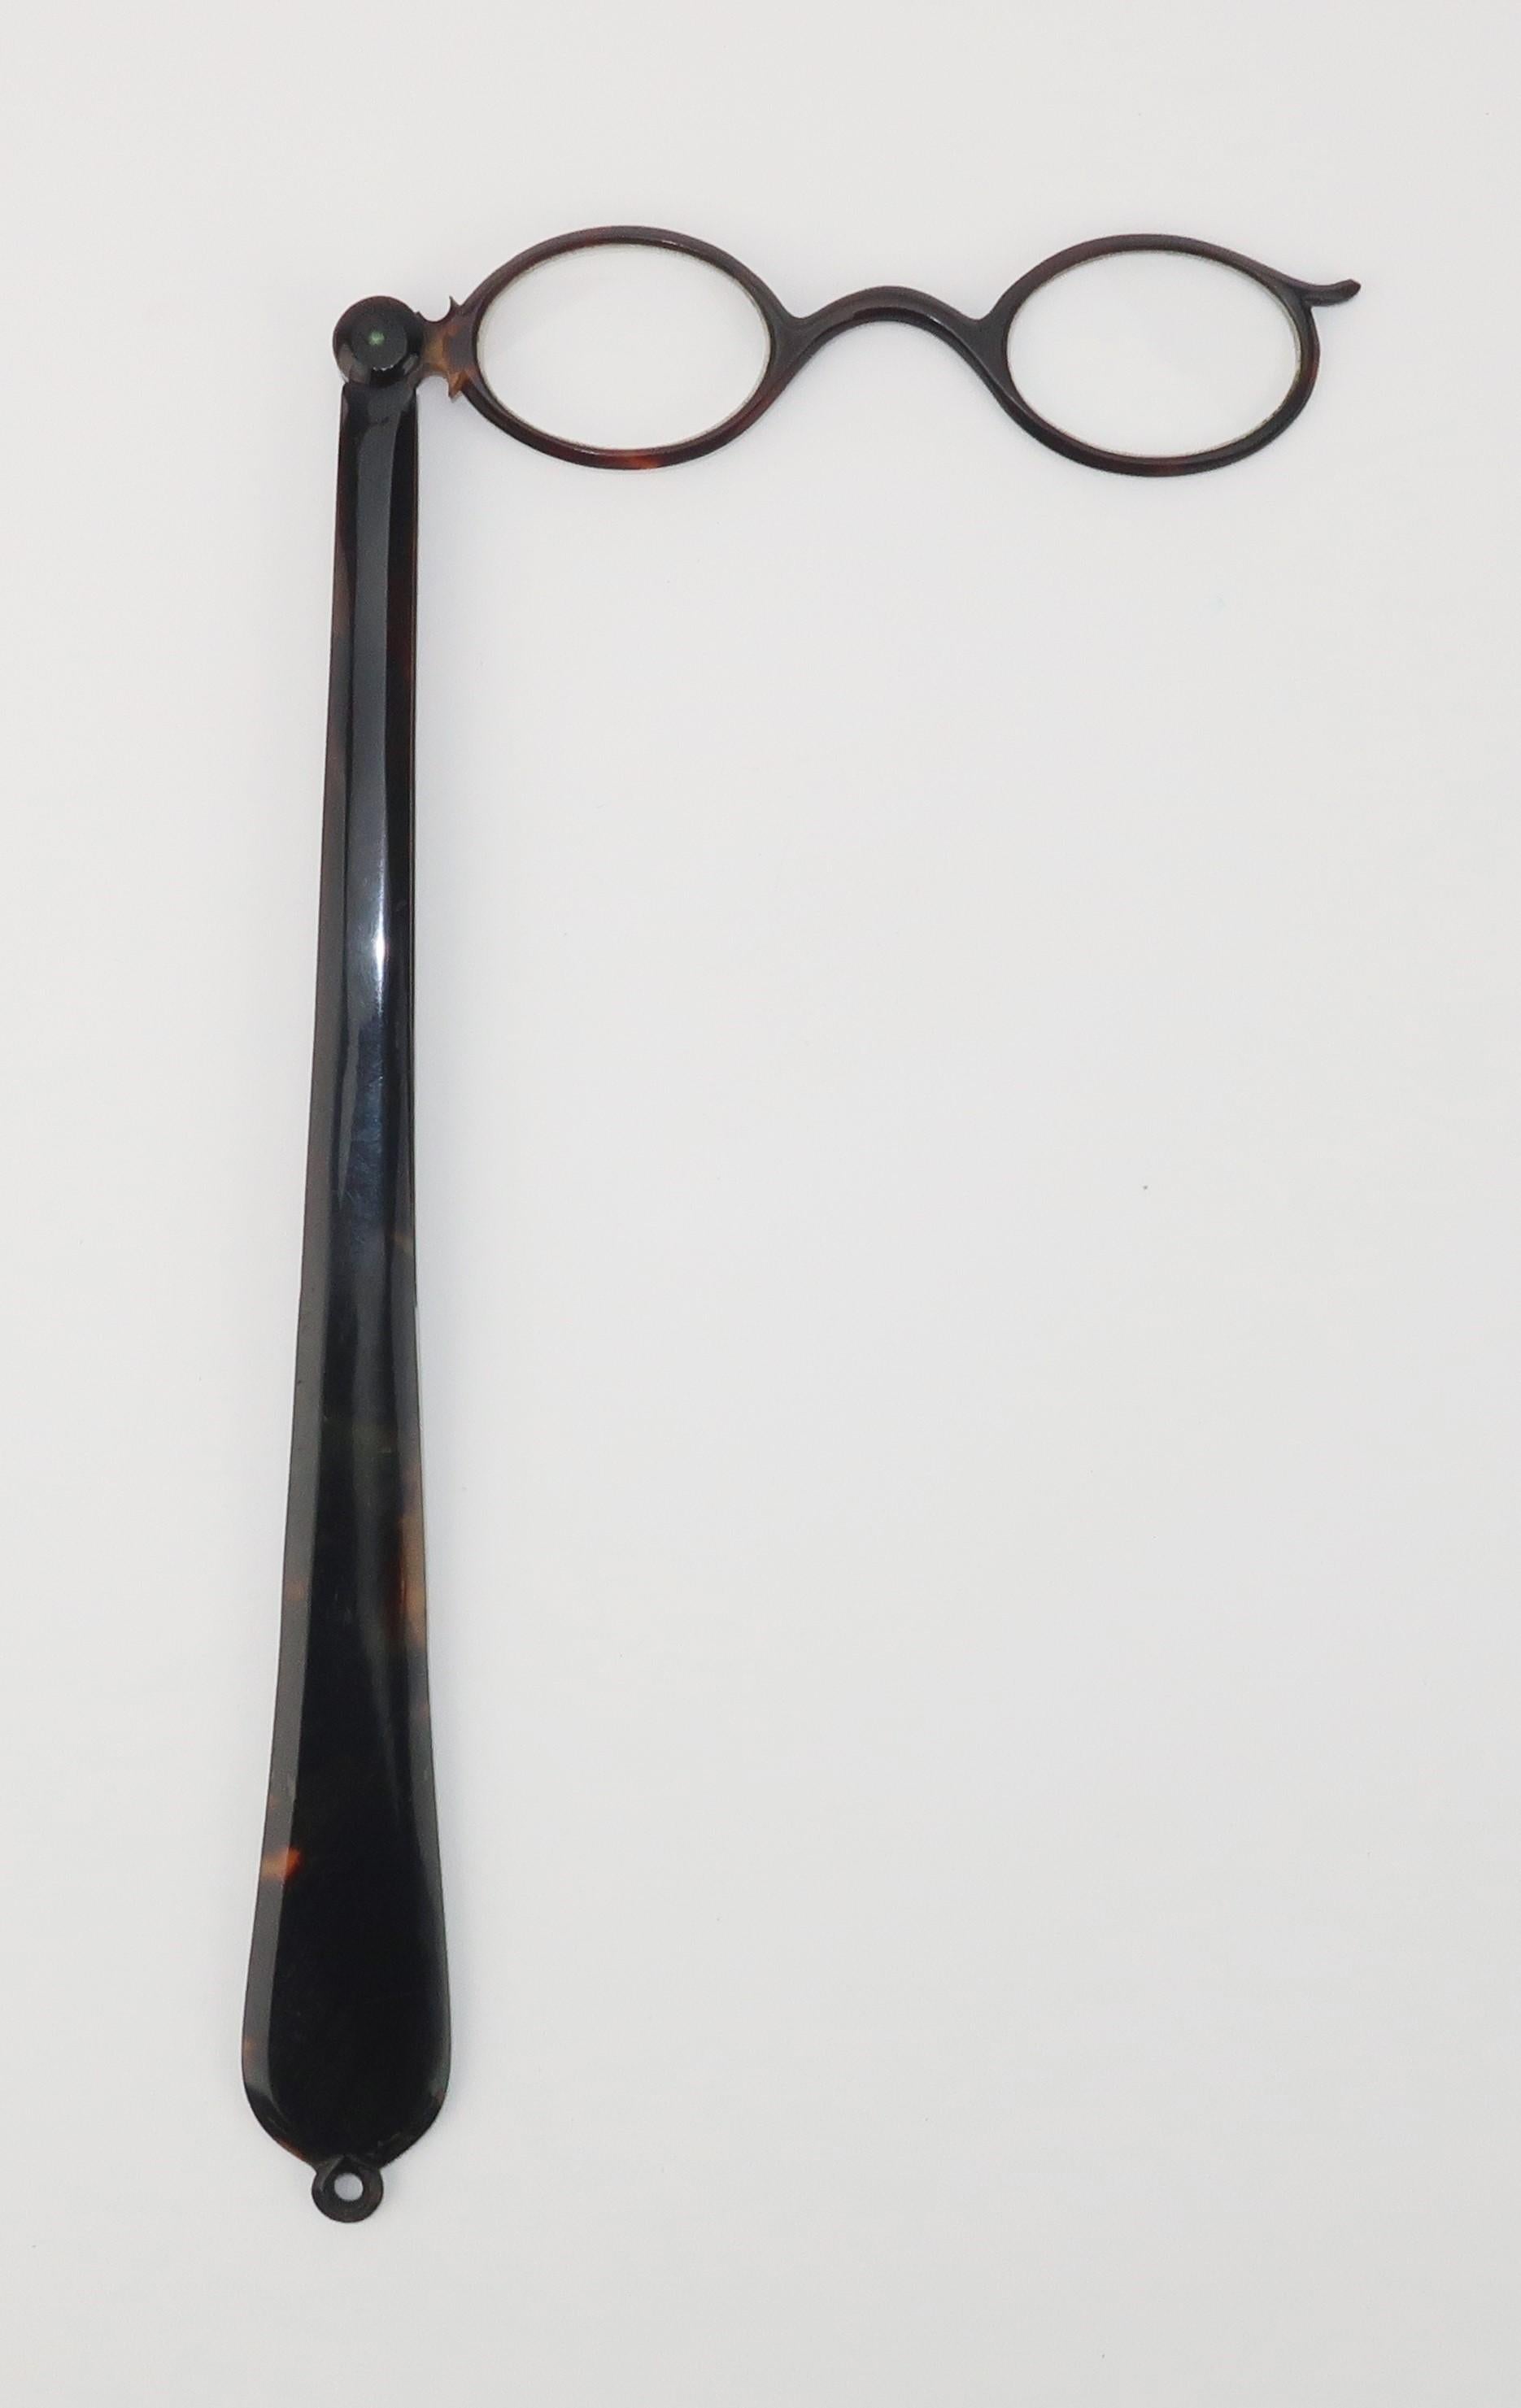 Late 19th Century imitation tortoise shell lorgnette magnifier glasses with a dramatic foldable long handle.  A ring at the end of the handle can be used to attach the lorgnette to a chain for easy wear.  Perfect for a dapper gent or a lady of